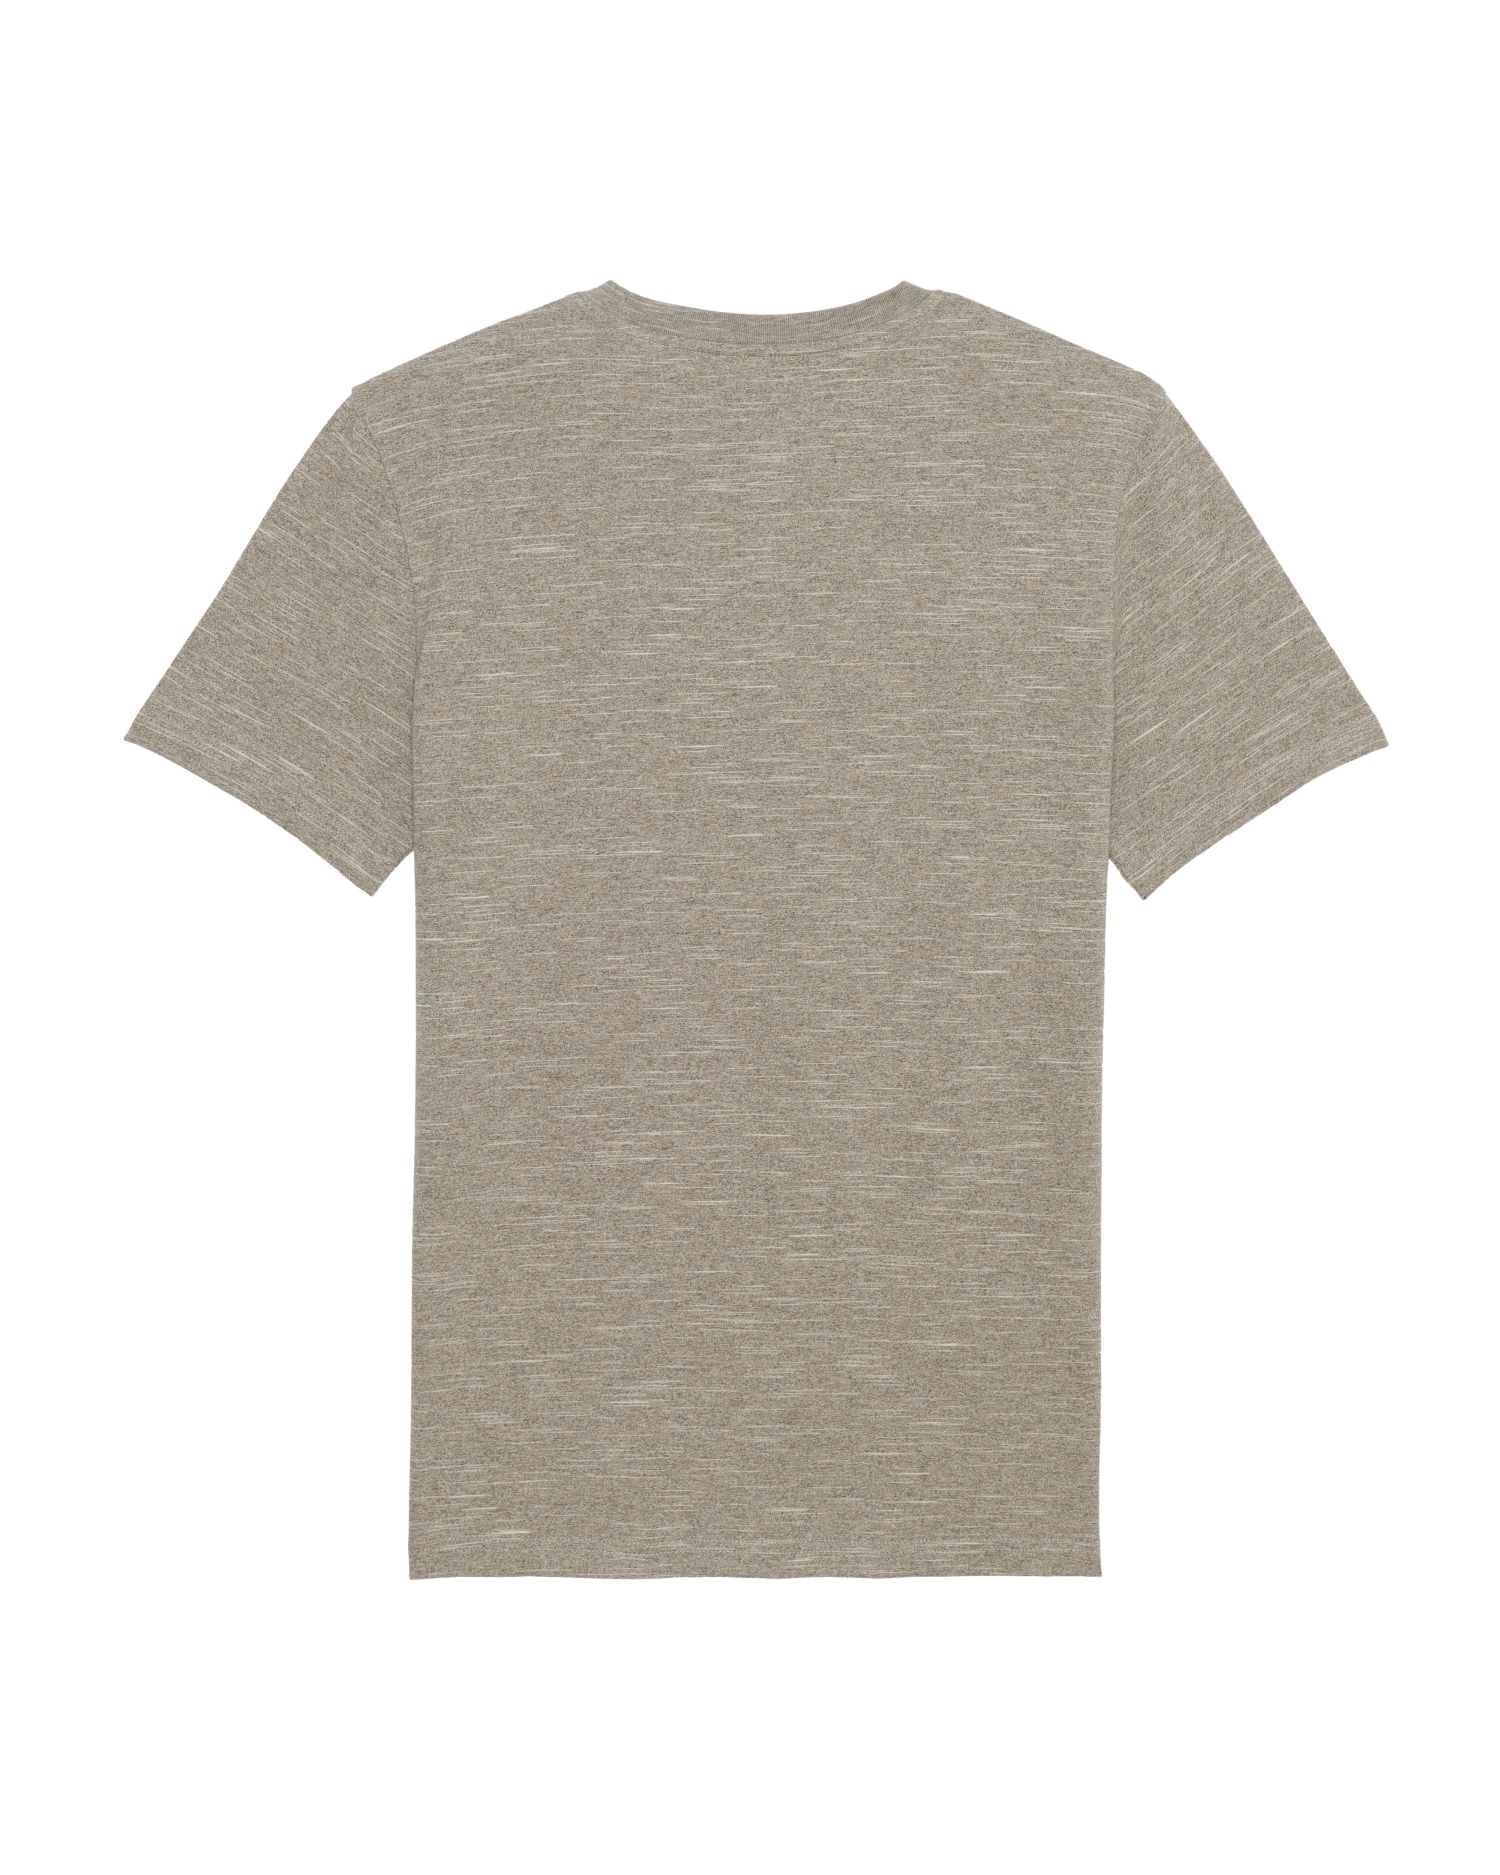 T-Shirt Creator in Farbe Wooden Heather